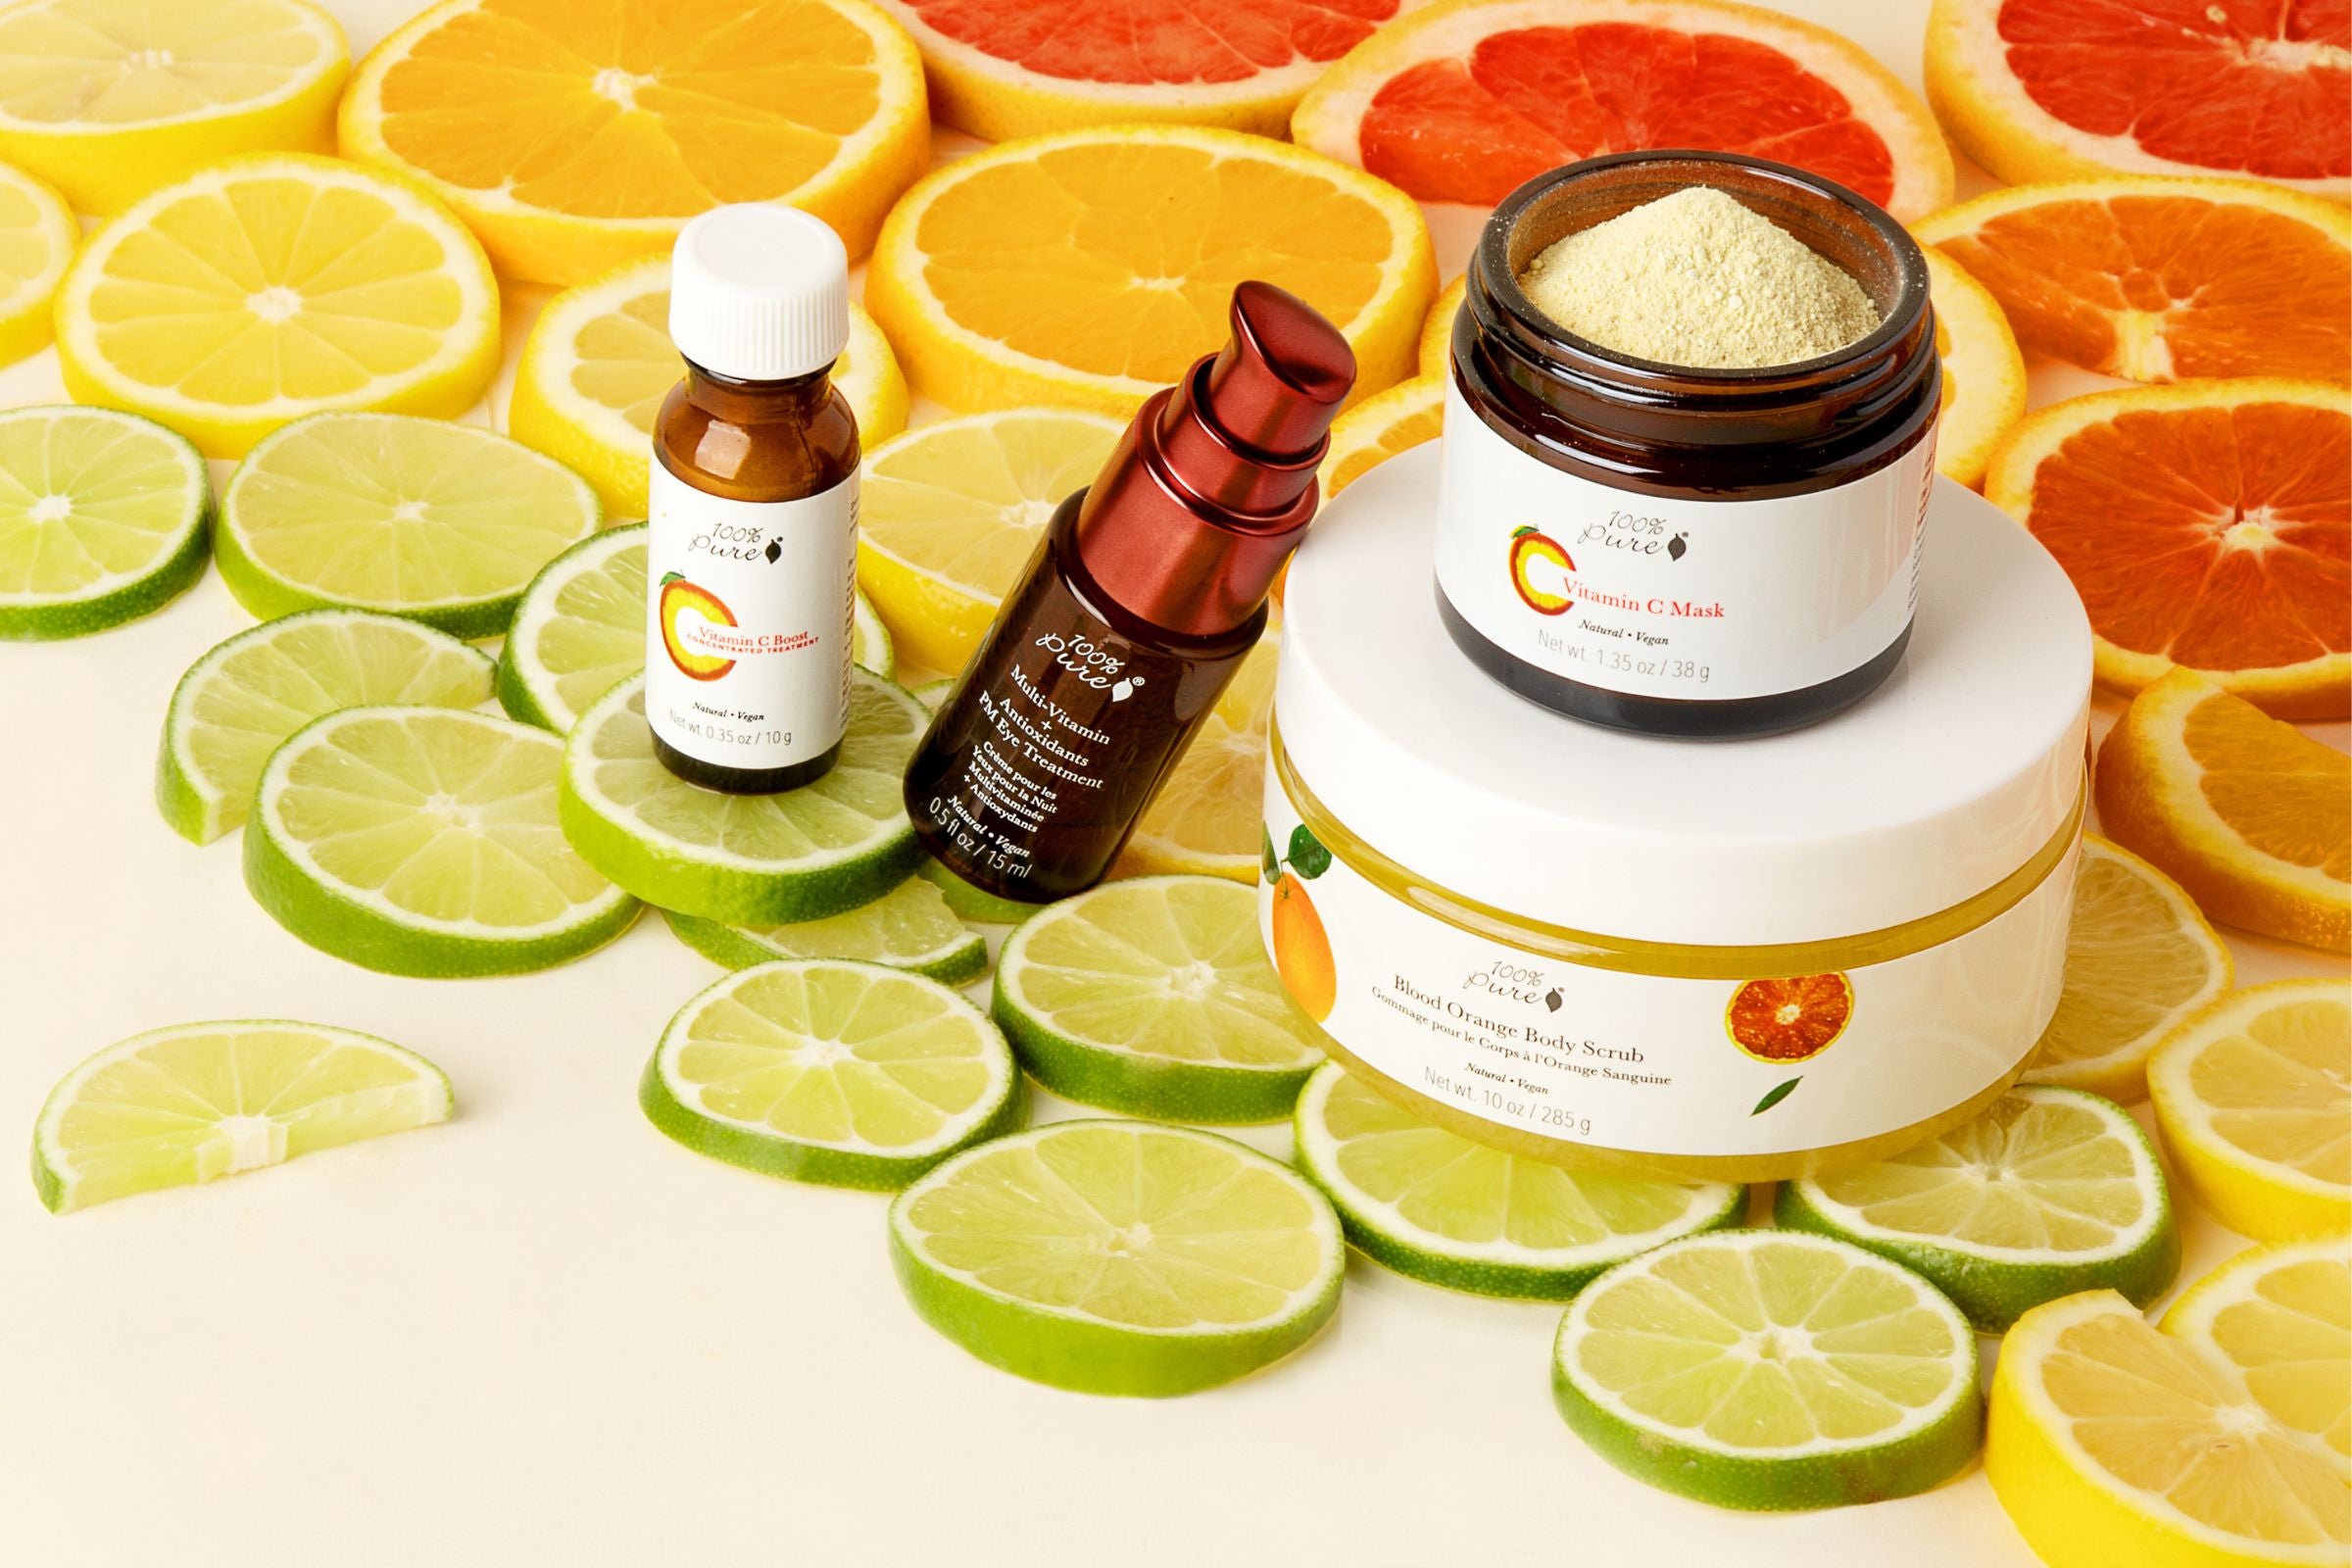 Cover Photo - 100_ Pure How To Use Vitamin C in Your Skincare Routine.jpg